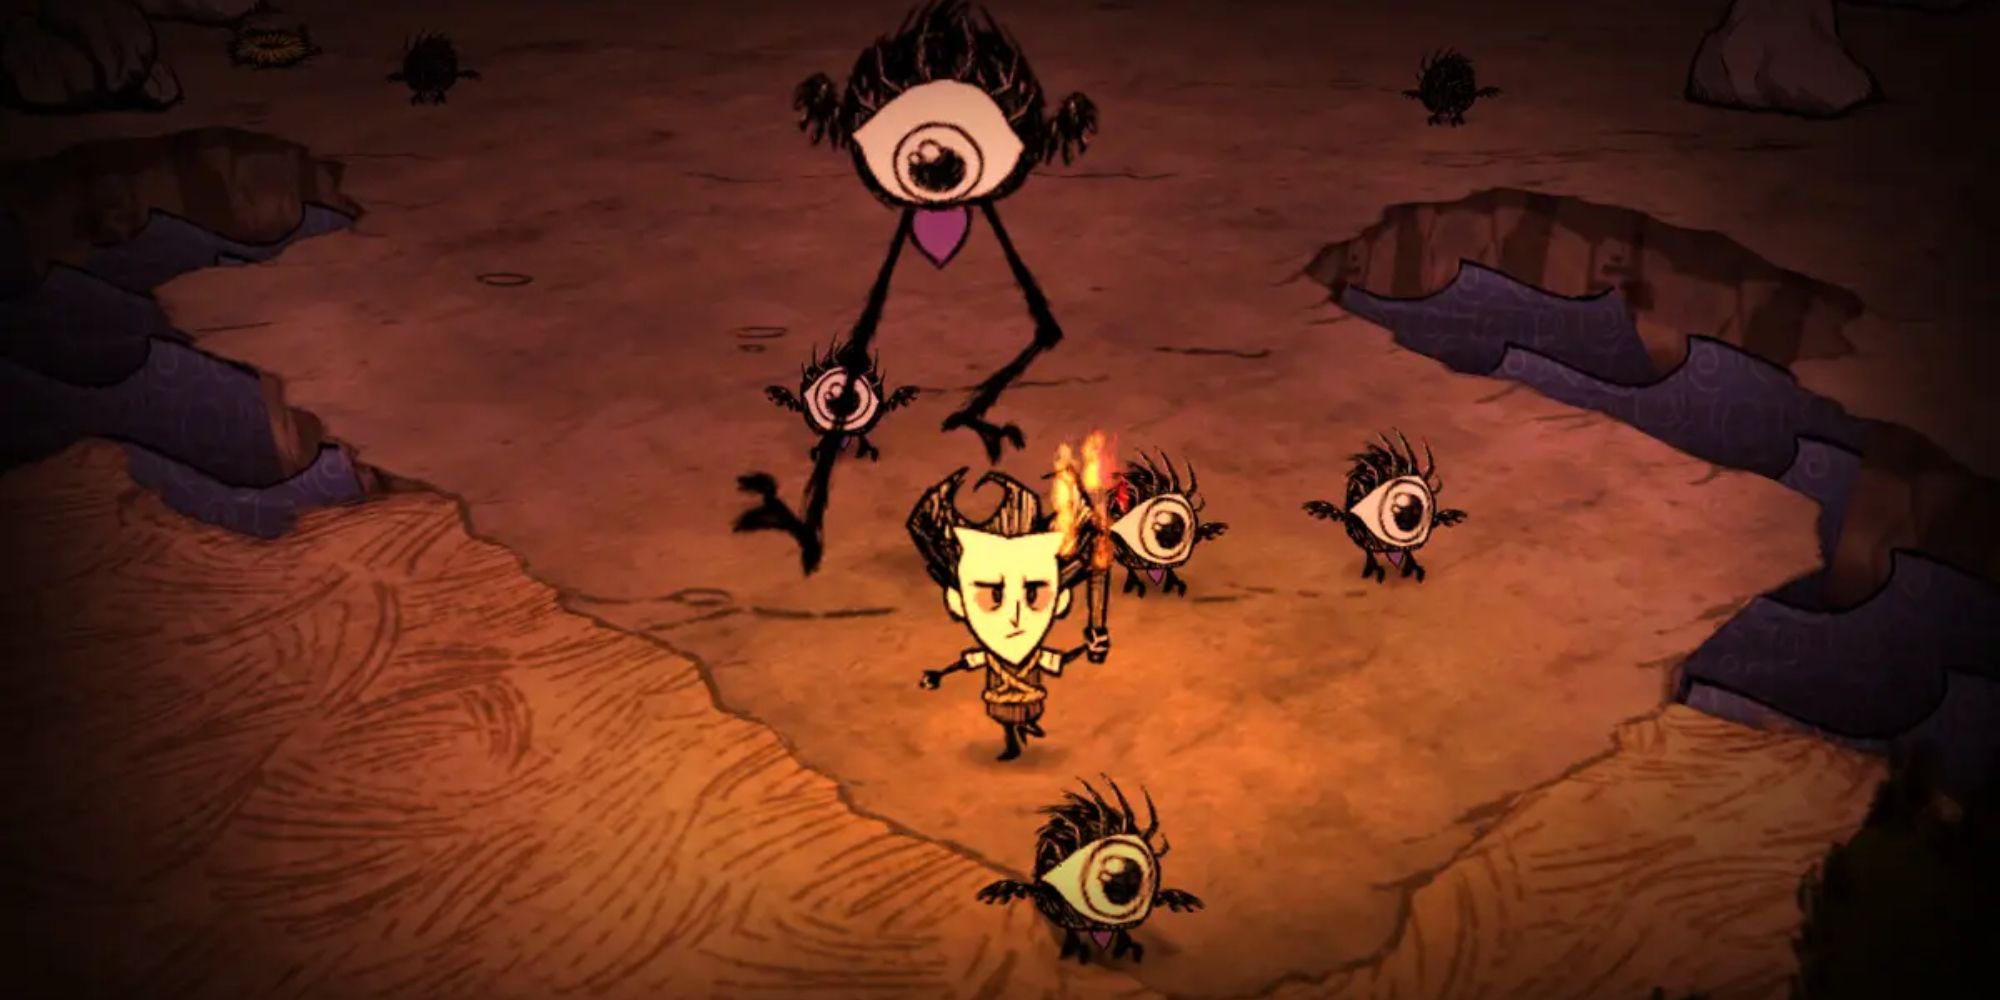 a screenshot from Don't Starve showcasing gameplay